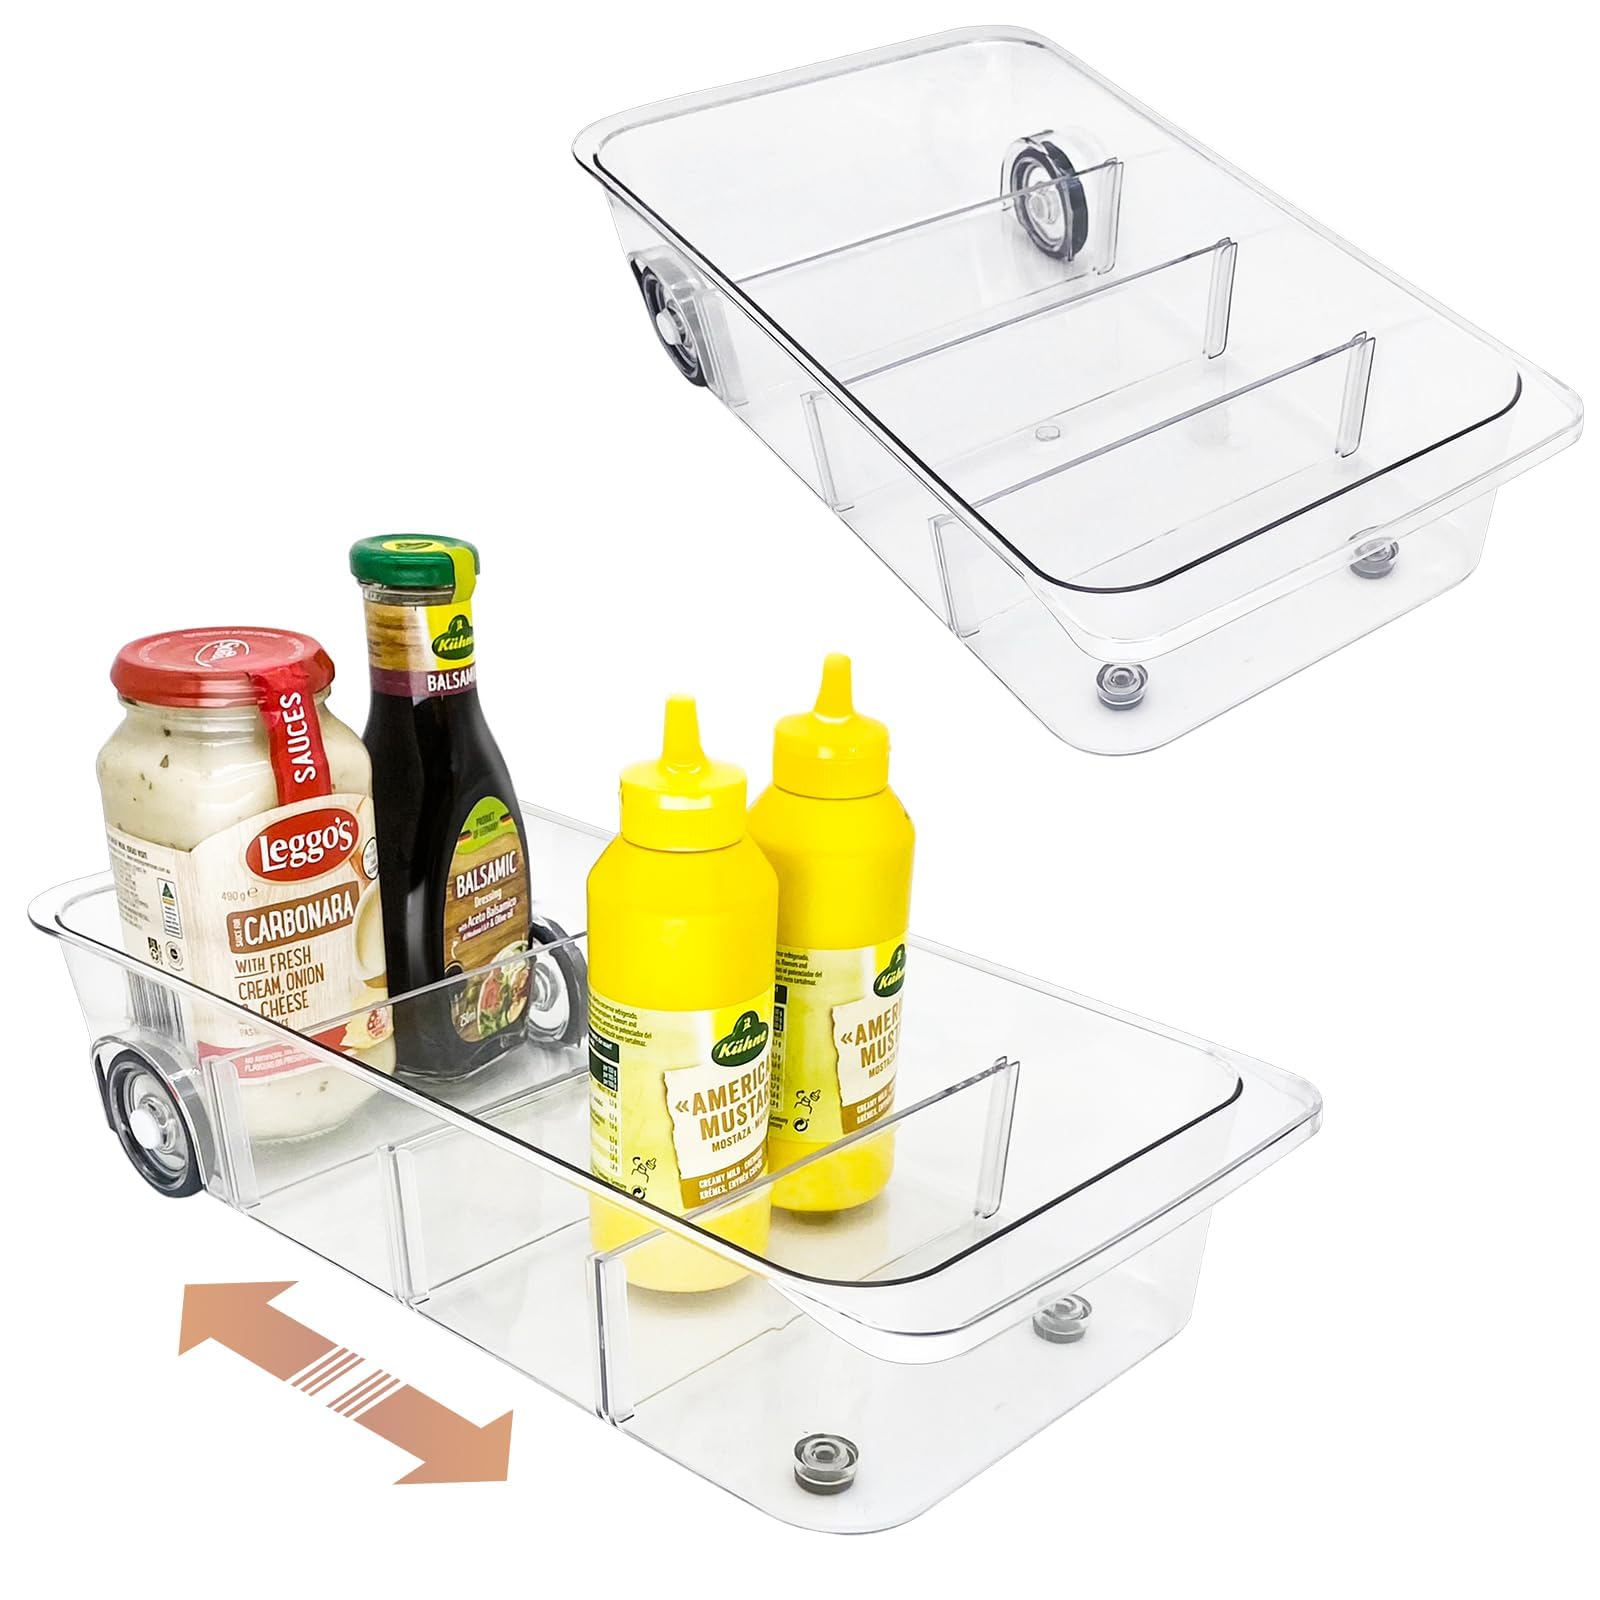 Ynelyase Clear Refrigerator Organizer Bins Plastic for Pantry Freezer Drawer Storage with Wheels and Adjustable Dividers Caddy (7.6" Wide, 2 Pack)